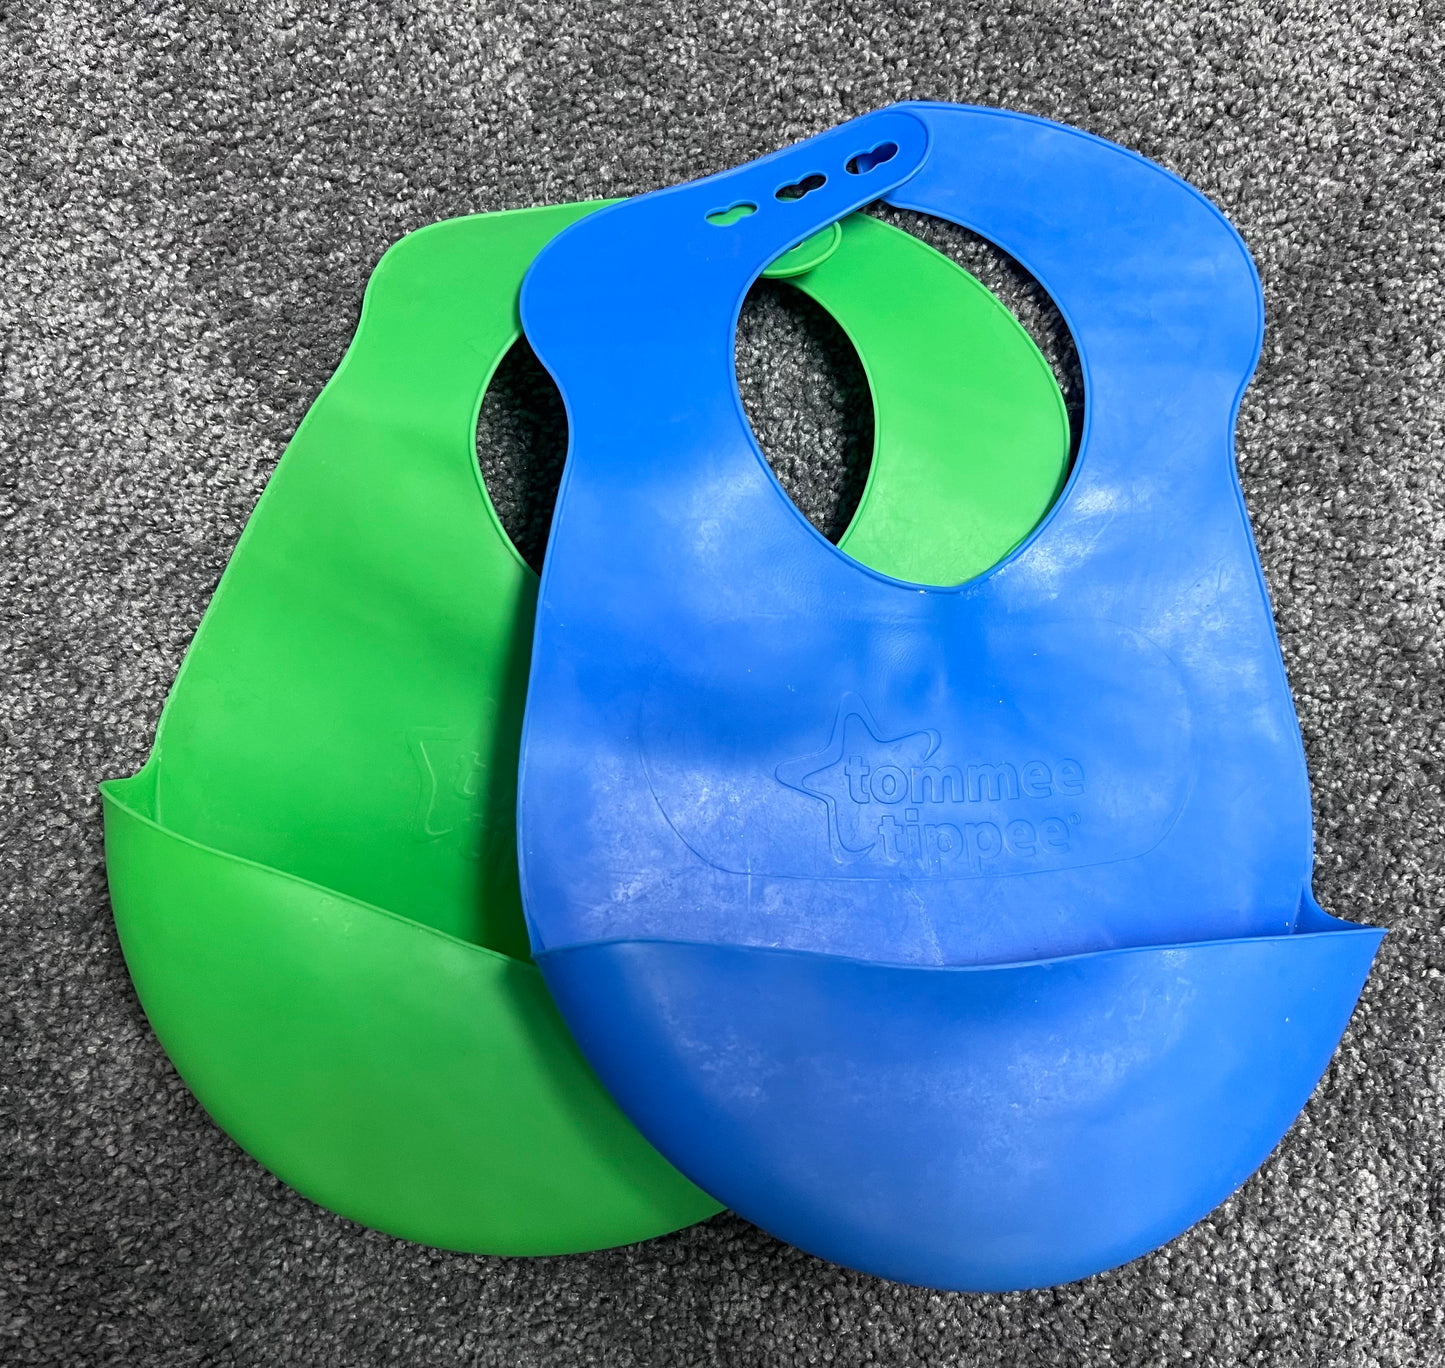 Blue/green tommee tippee silicone bibs (2)